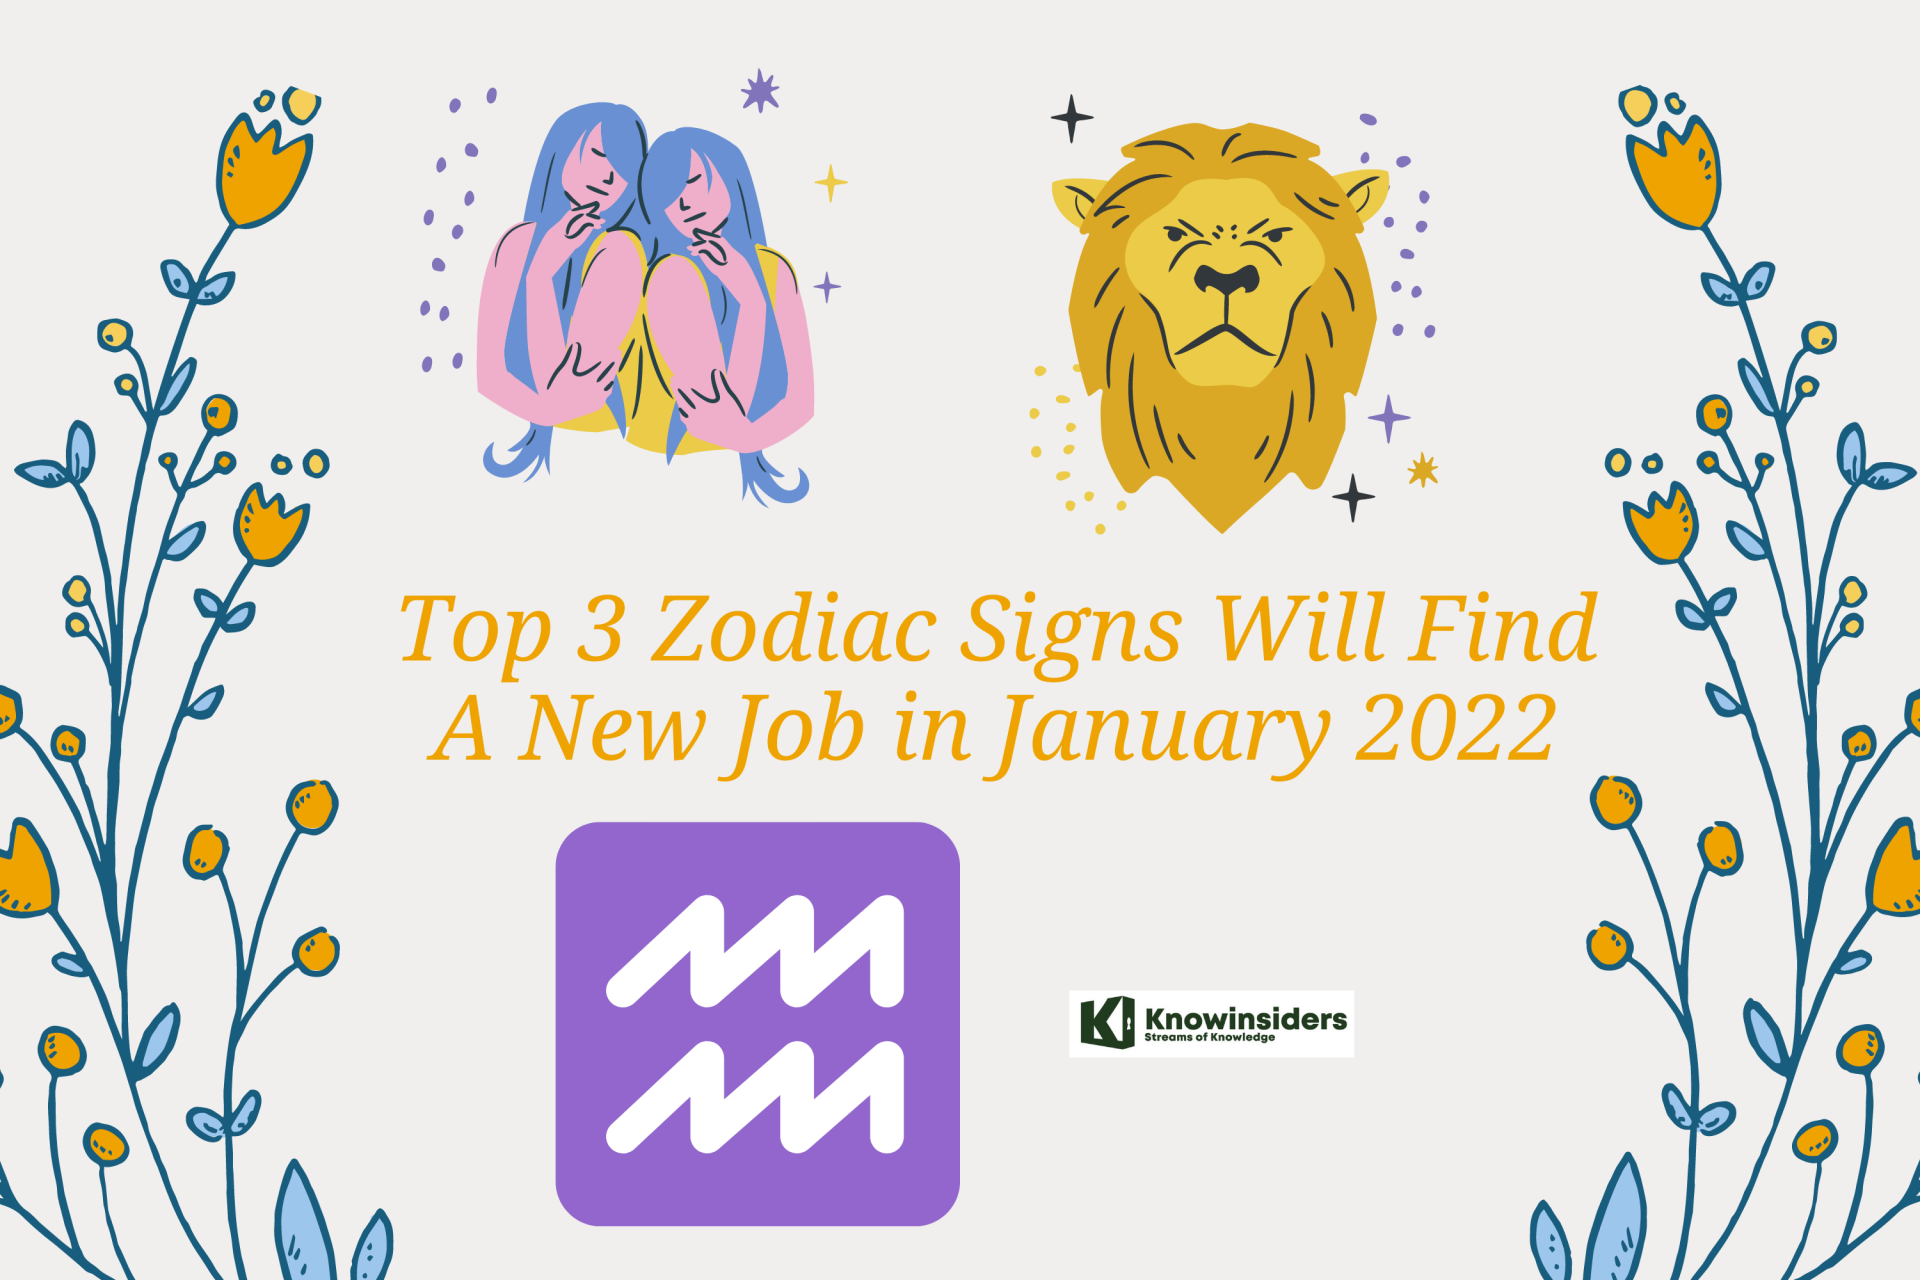 3 Zodiac Signs Will Find A New Job in January 2022